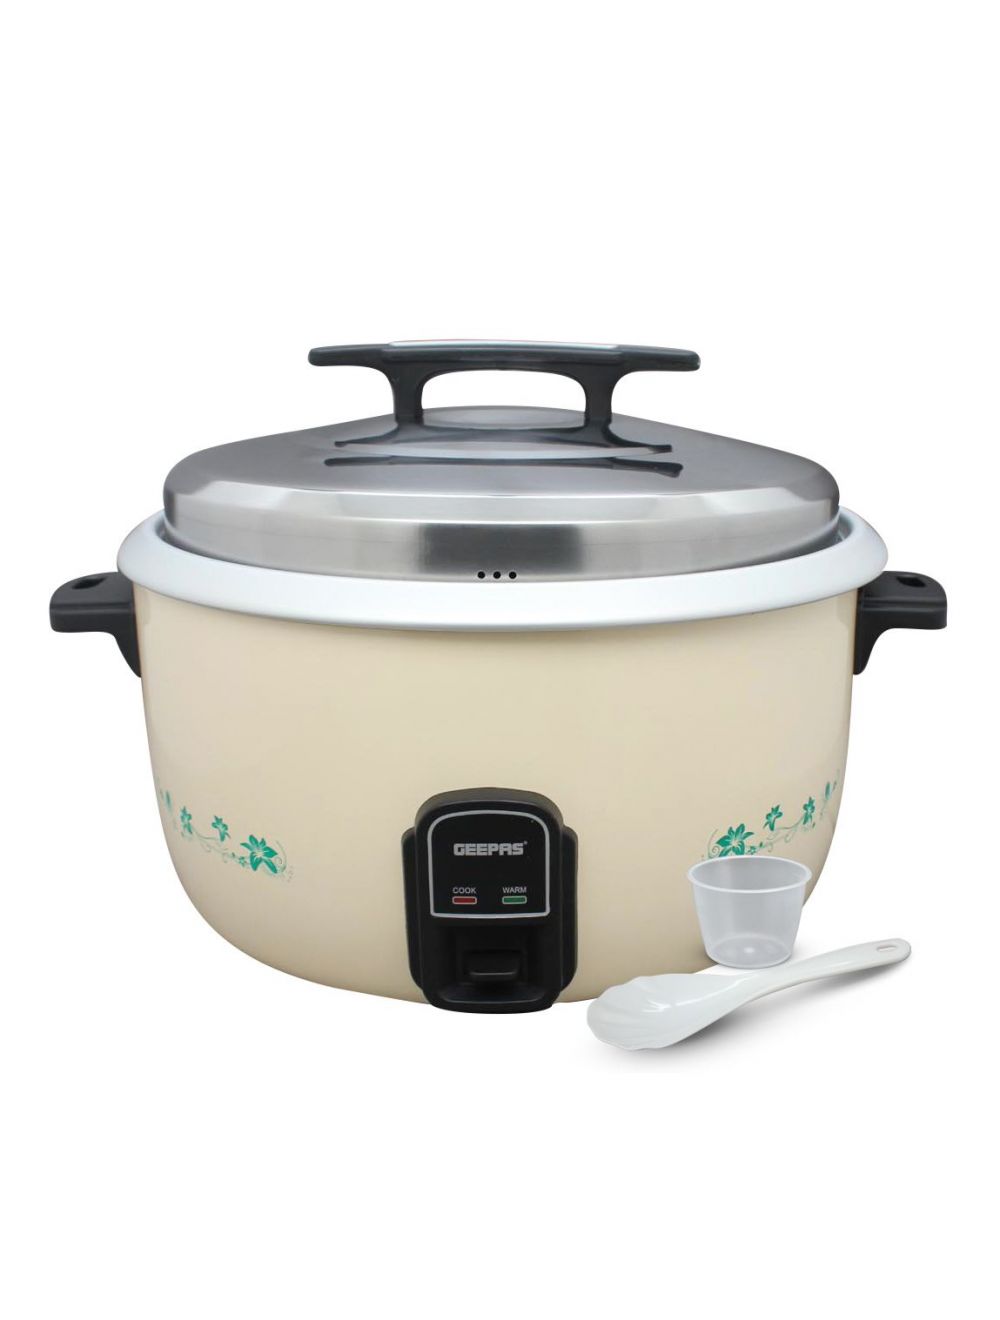 Geepas 10 L Electric Rice Cooker with Steamer | 3000W